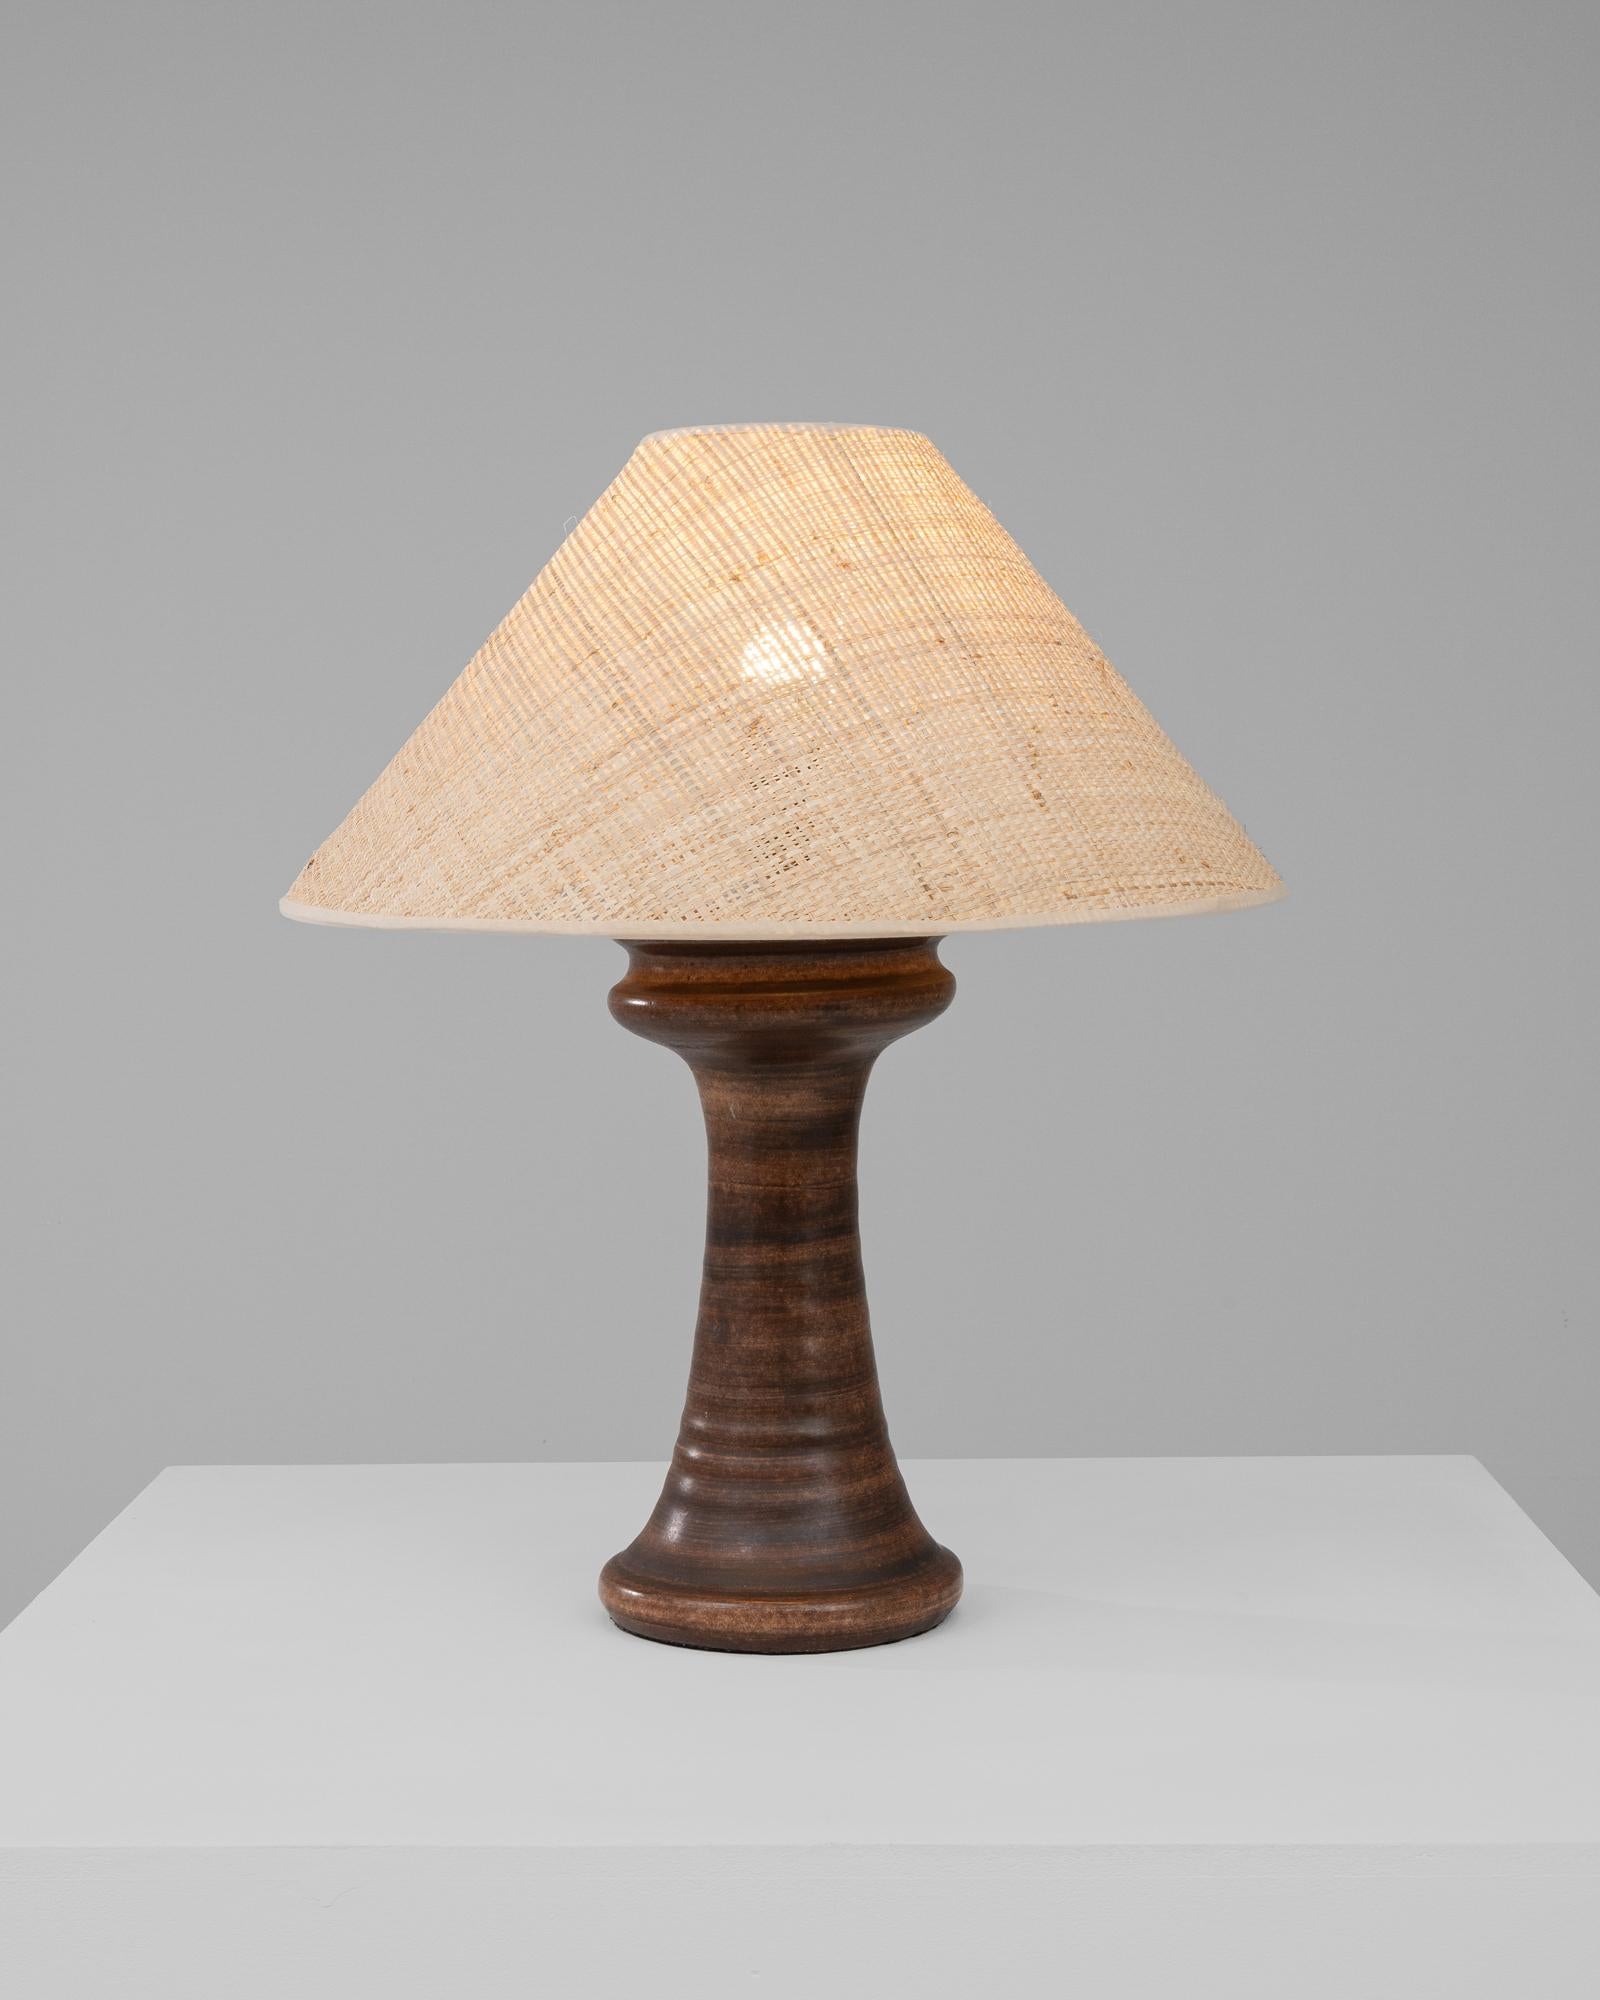 Discover a fusion of natural textures with this 20th Century German Ceramic Table Lamp, a piece that seamlessly blends the organic with the functional. The base of the lamp is a robust column of dark, earthen-toned ceramic, its surface swirling with